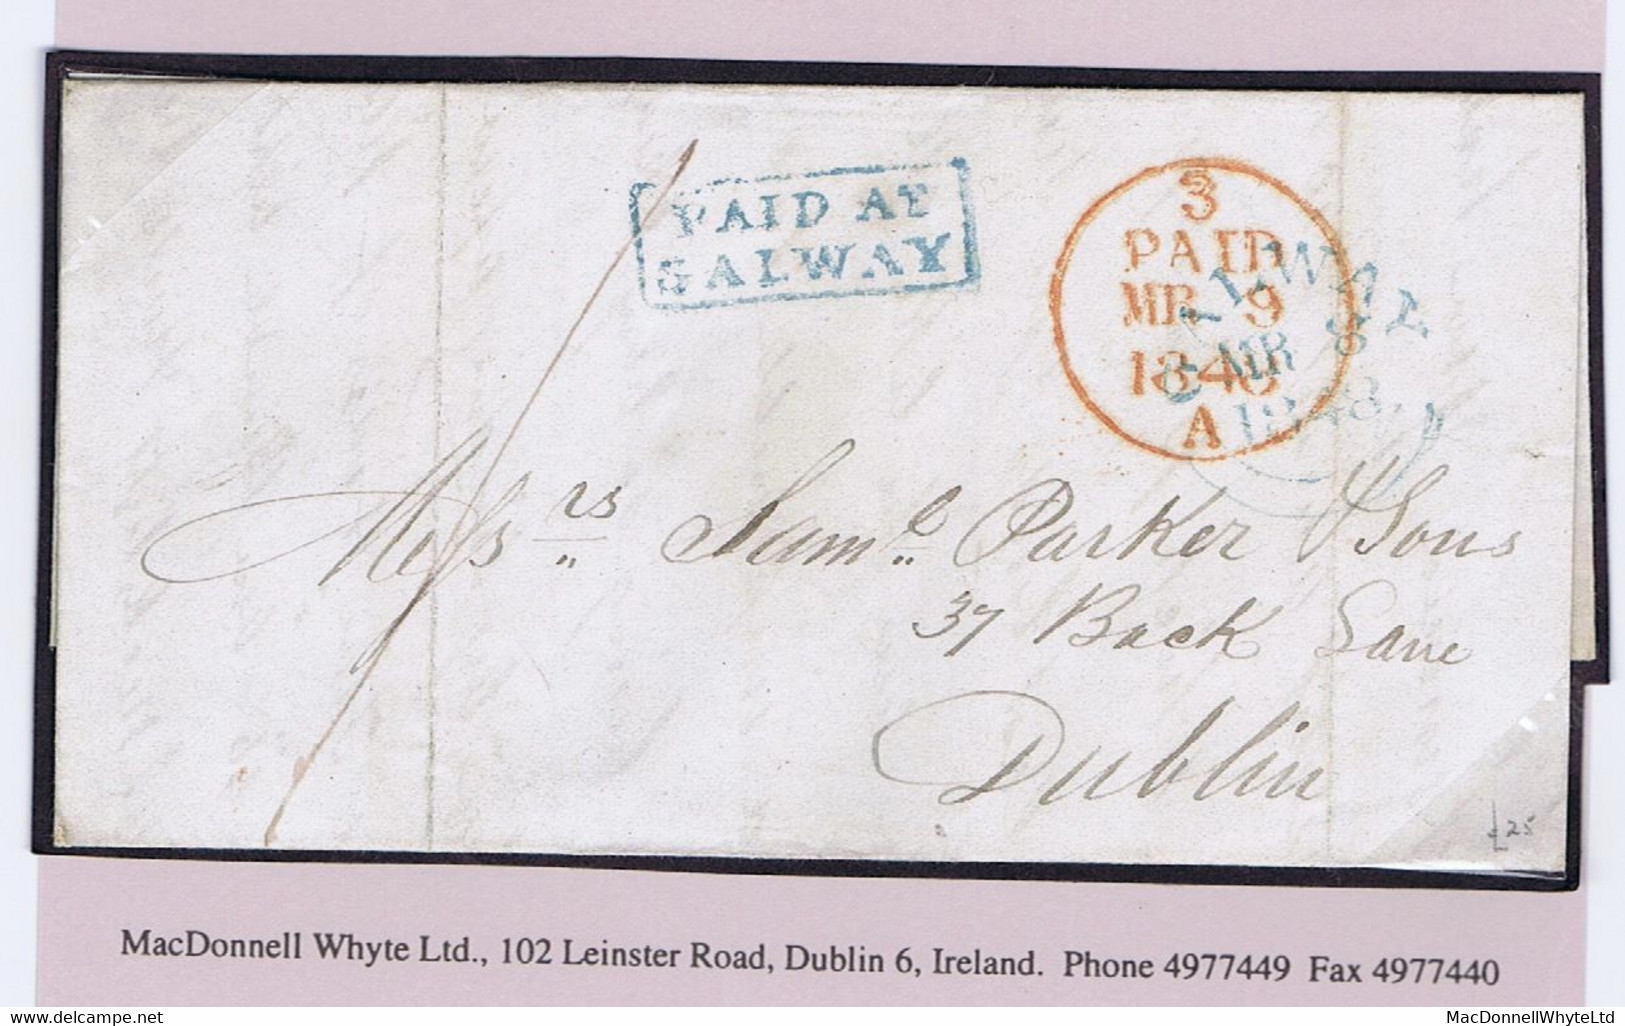 Ireland Galway 1848 Cover To Dublin Boxed 2-line PAID AT/GALWAY In Blue, Matching GALWAY MR 8 1848 Cds - Prephilately